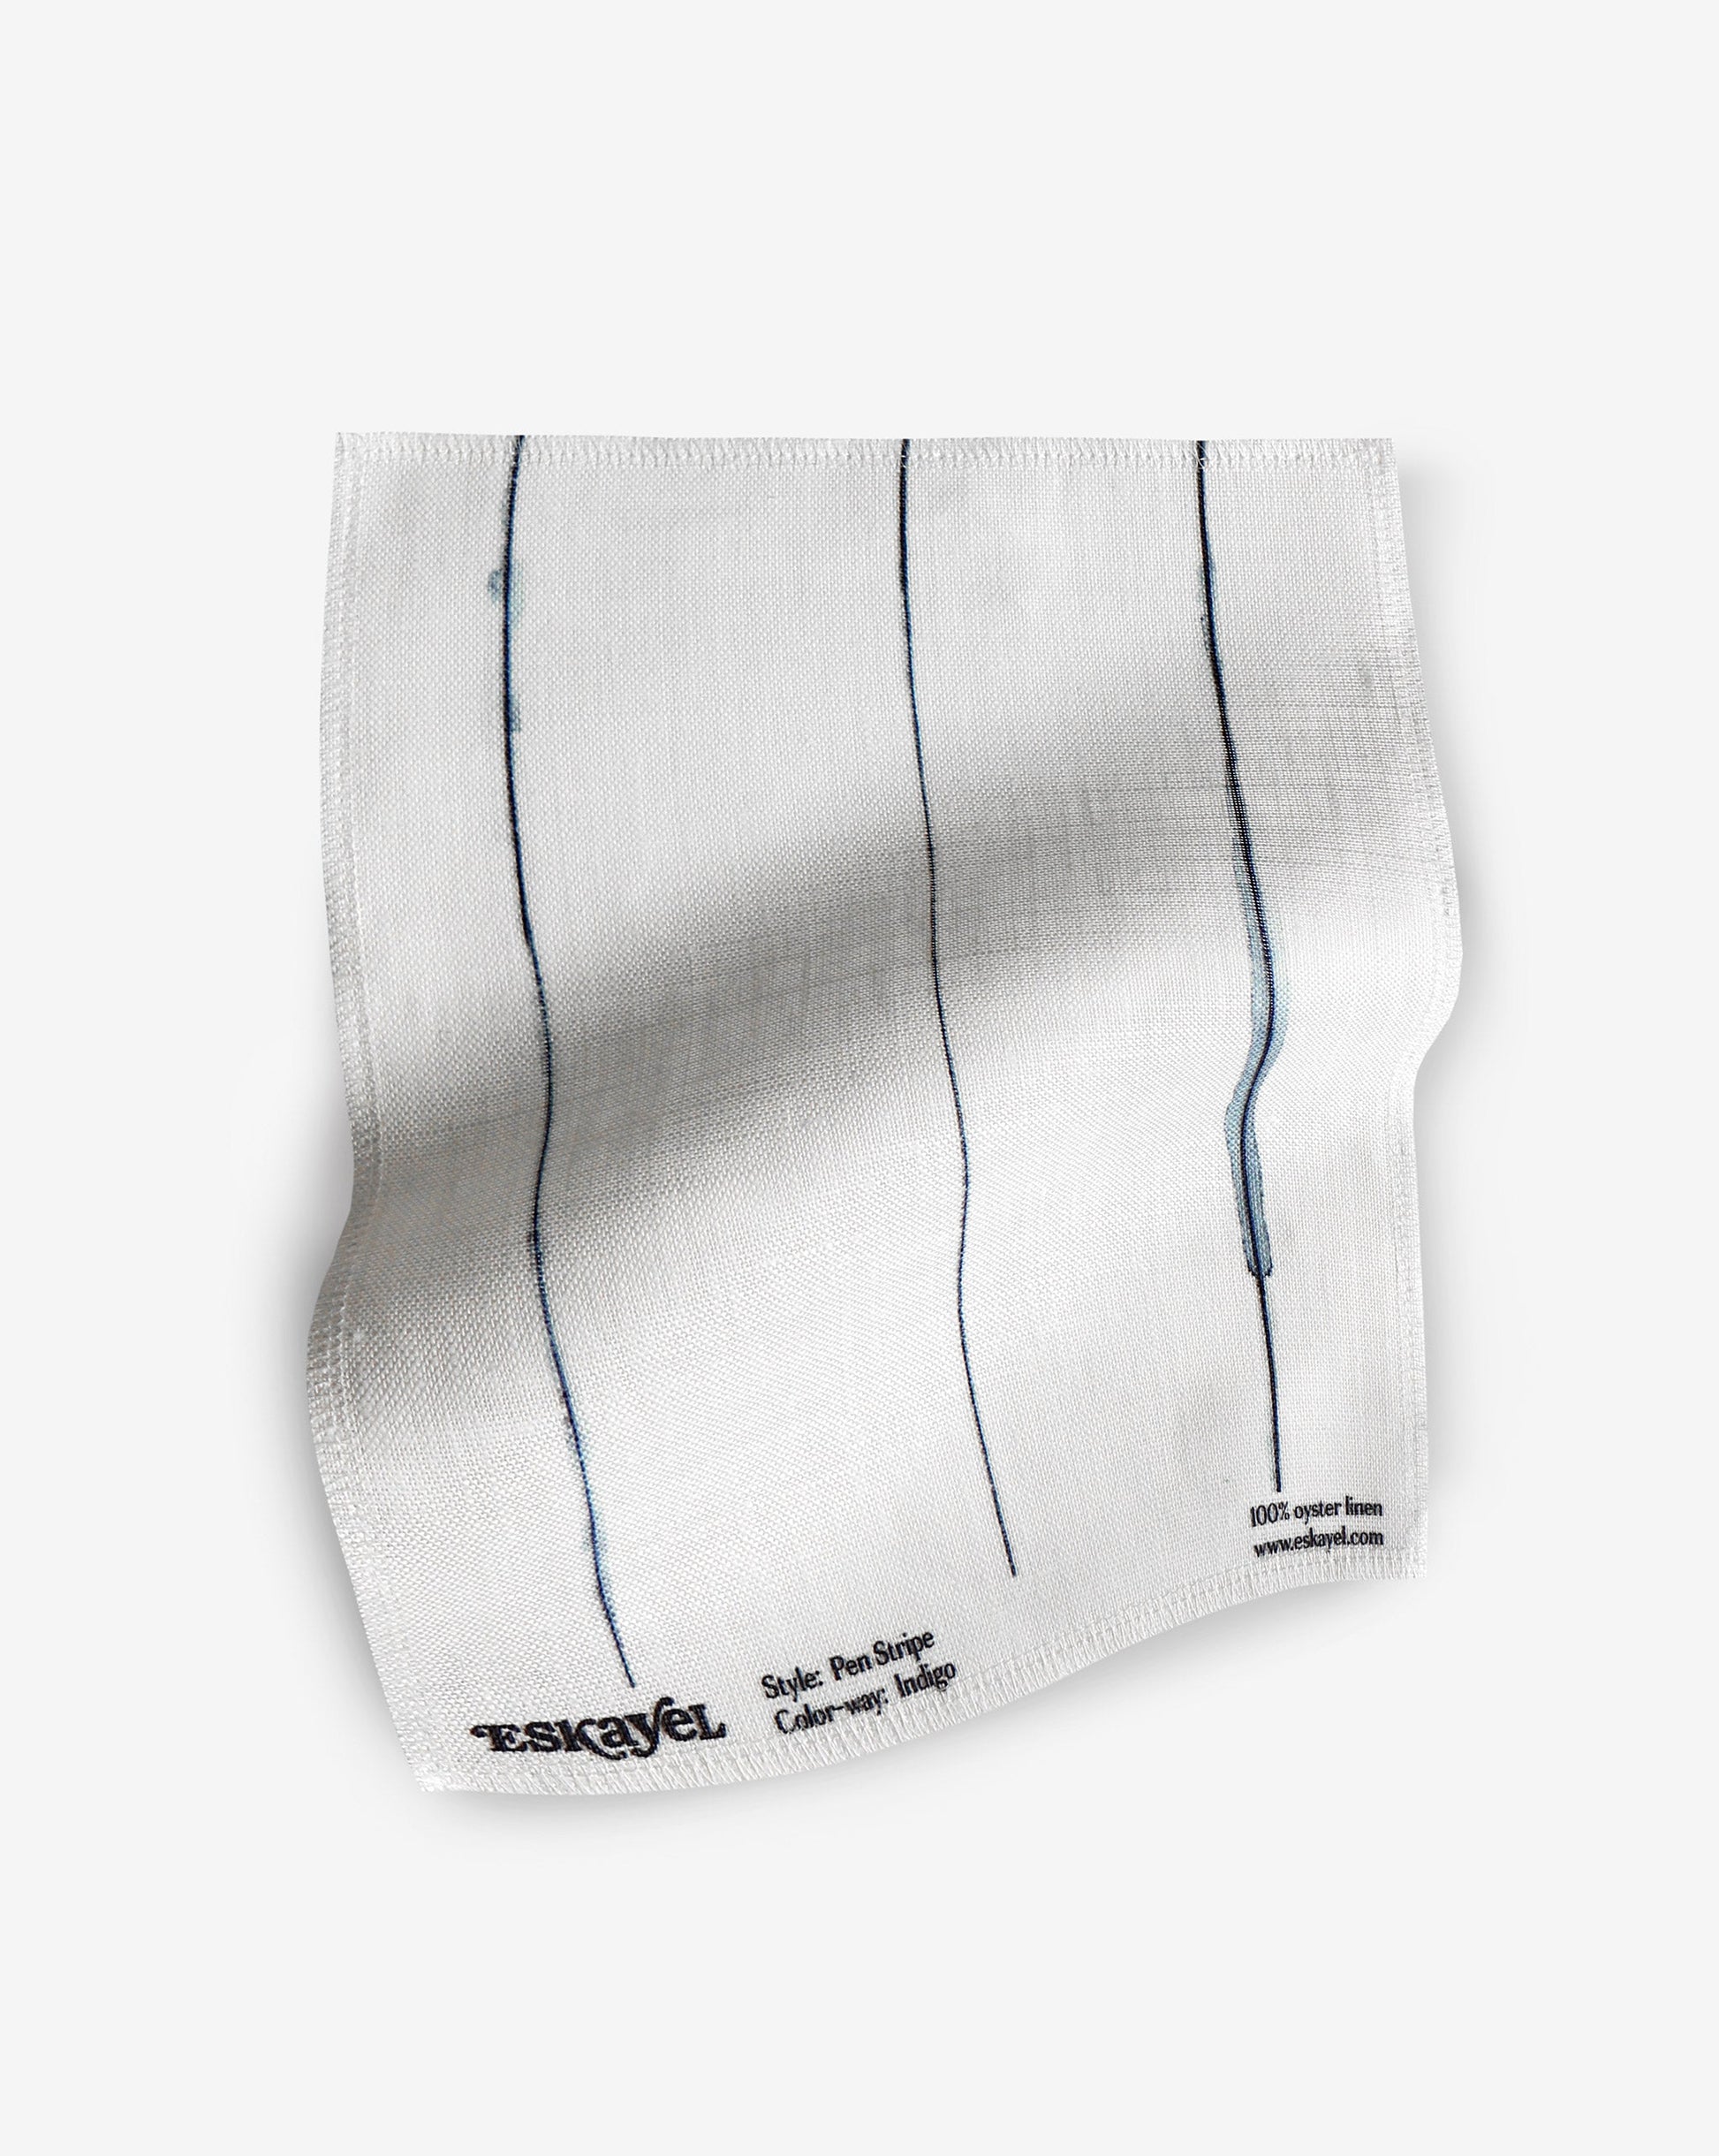 A fabric with our pen stripe pattern featuring a conventional pinstripe design of straight inky lines in navy blue and white.